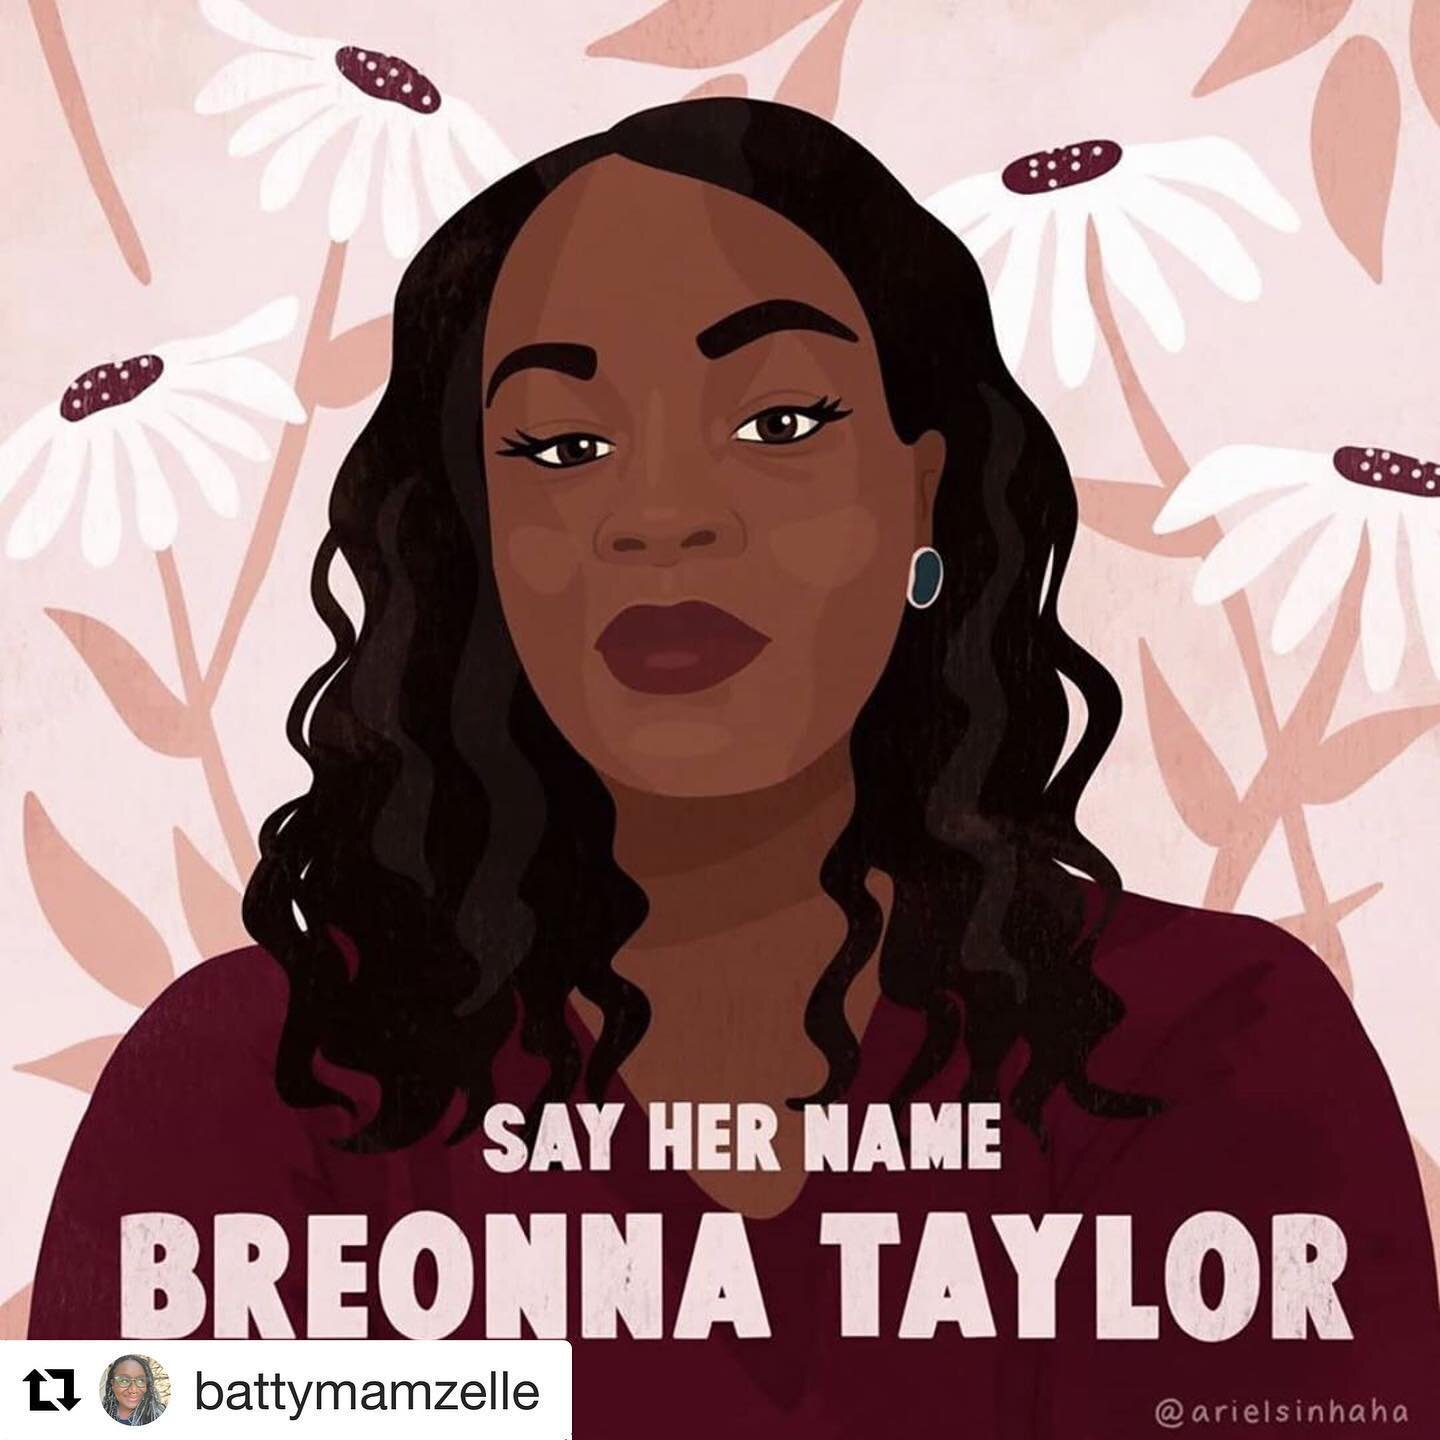 Today was #breonnataylor &lsquo;s birthday. Sharing info in bio on how to commemorate her life and step up against injustice. #sayhernamebreonnataylor 
Beautiful artwork by @arielsinhaha  and @nemesomi 🙏🏽🙏🏾🙏🏿 #Repost @battymamzelle with @get_re